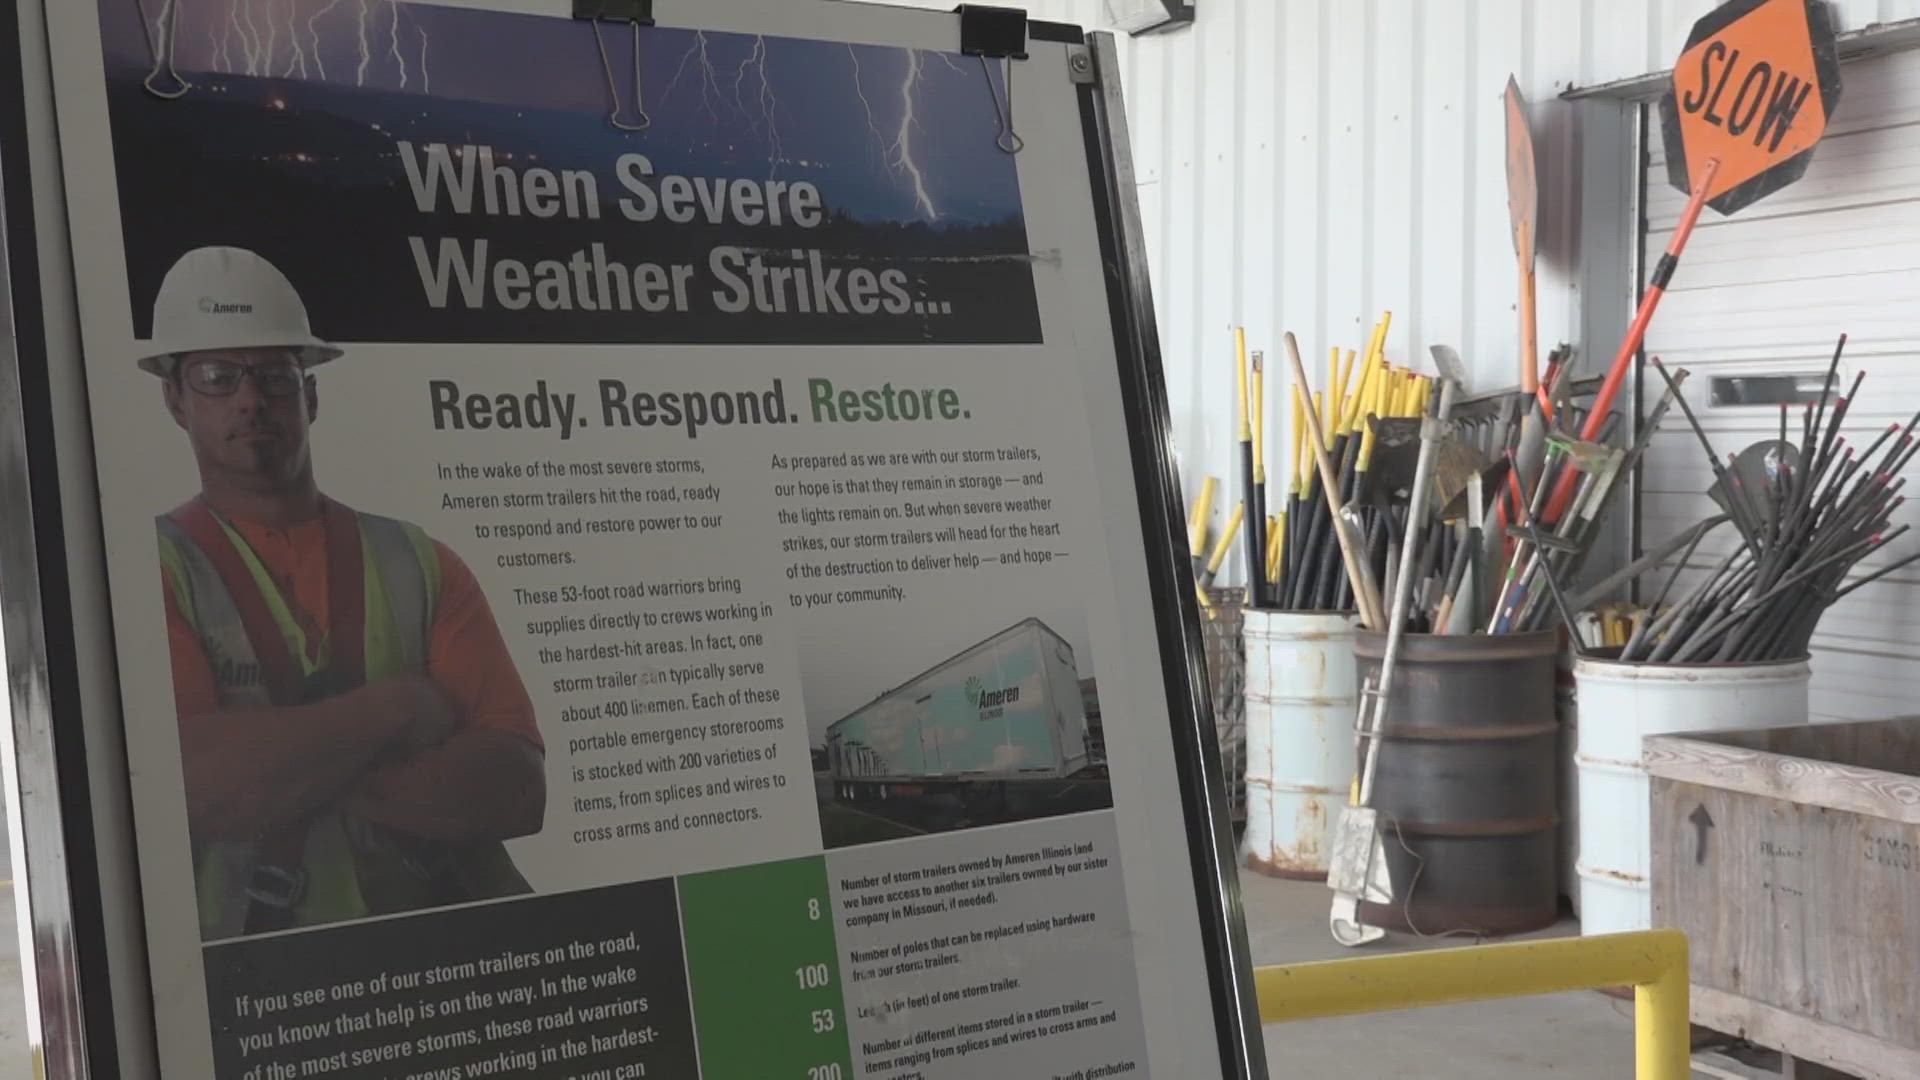 Ameren Illinois hosted an Emergency Preparedness Open House Wednesday. It gave a behind-the-scenes look at what goes into preparing for severe weather.